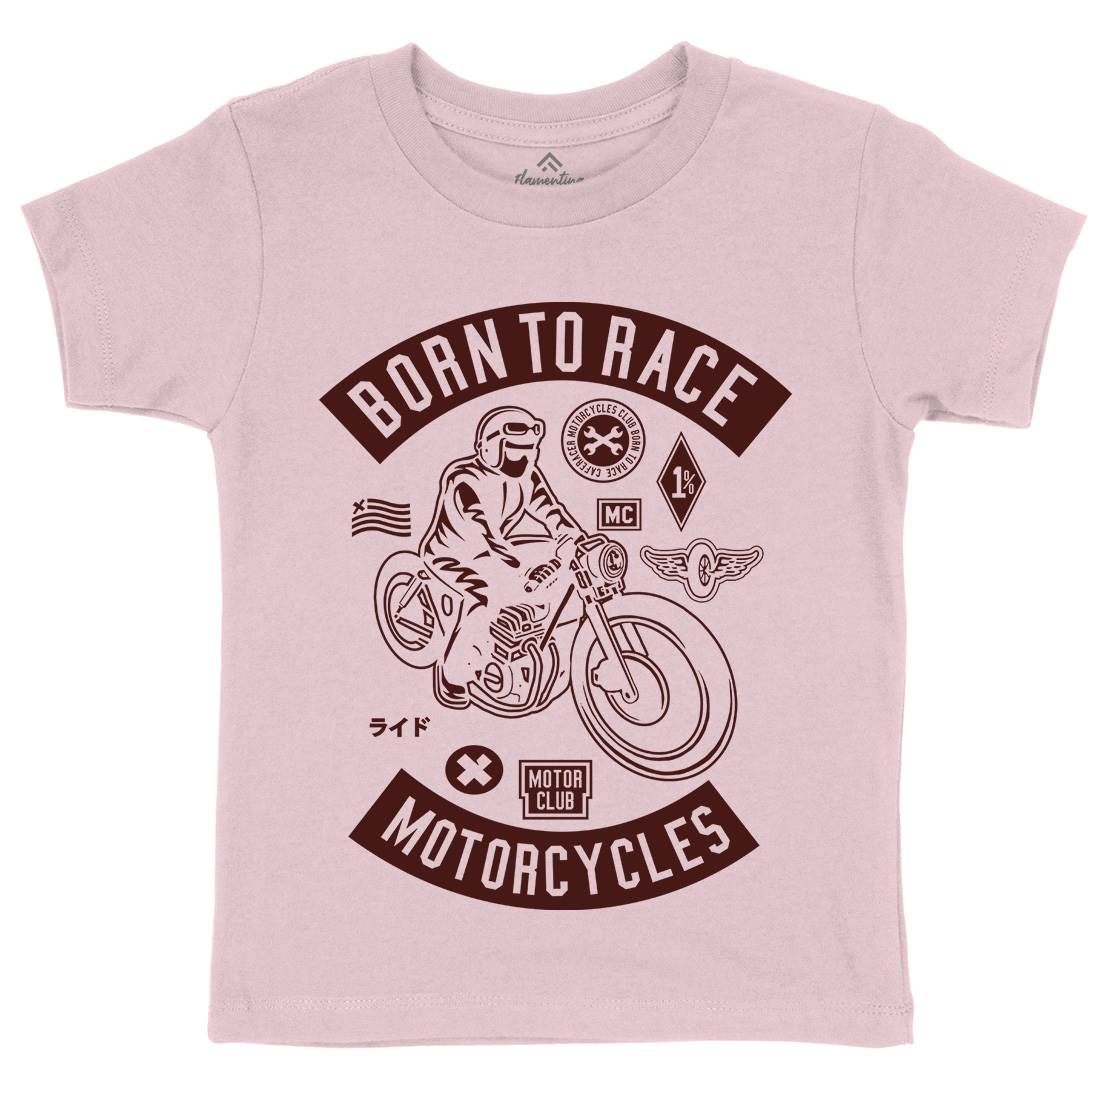 Born To Race Kids Crew Neck T-Shirt Motorcycles A210